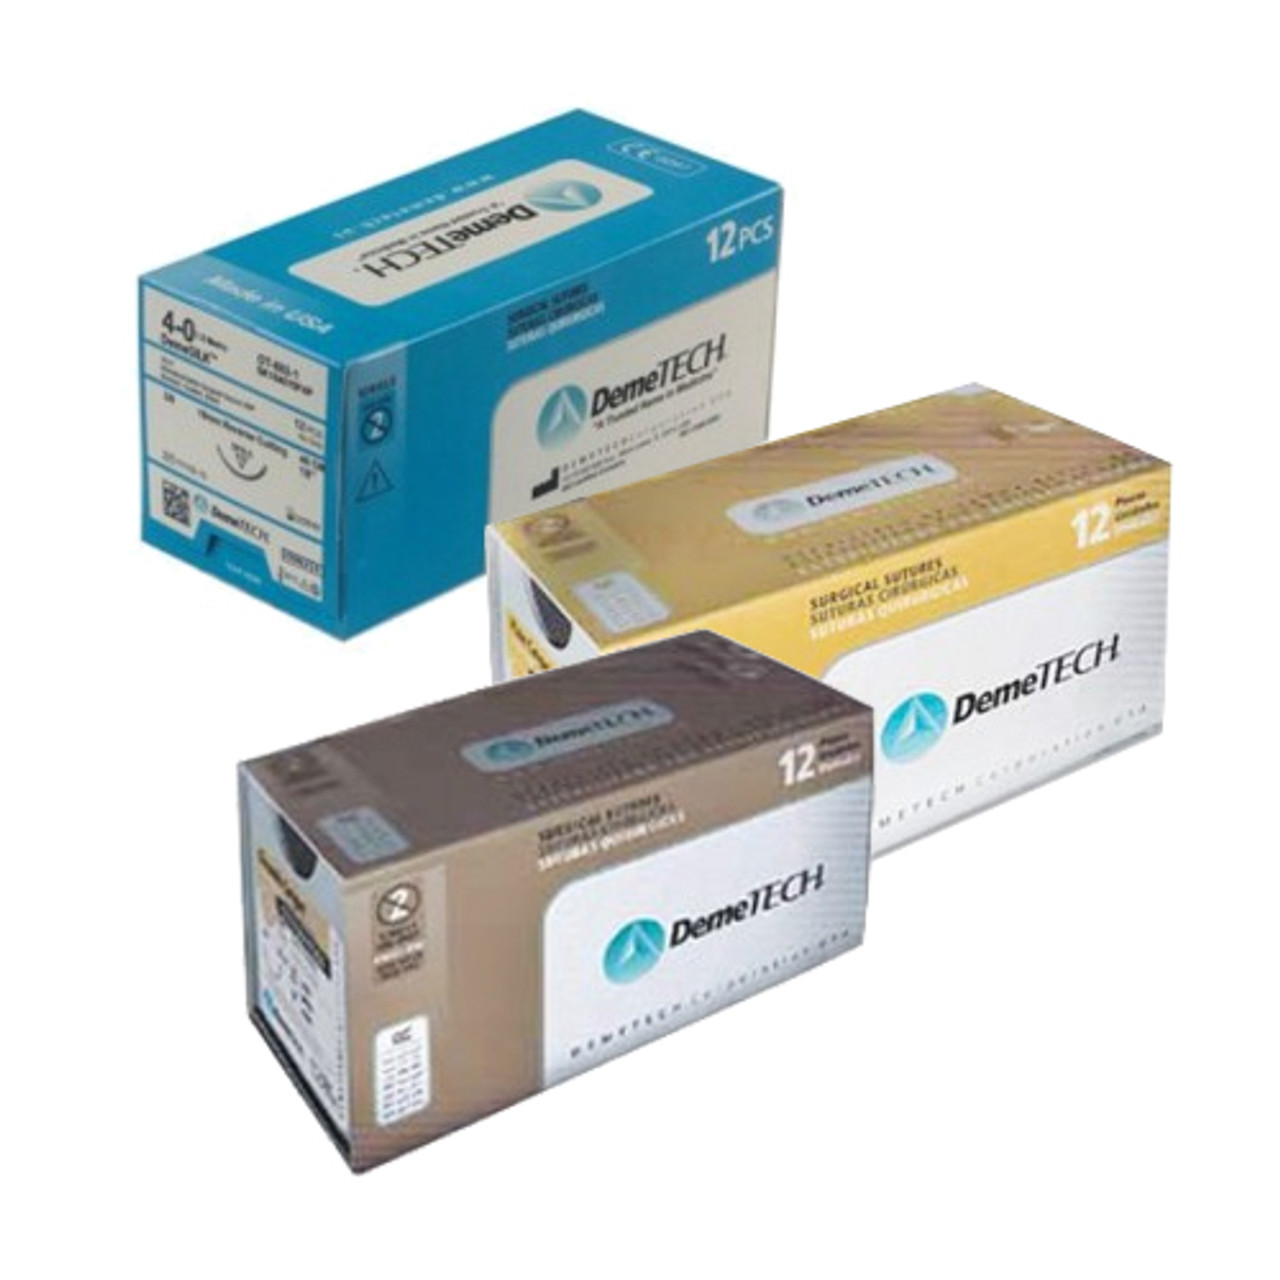 Polyglycolic Acid (PGA) 3-0 3/8 18" 19mm (C6) Precision Point Reverse Cutting Colorless Sutures 12/bx. - DemeTech